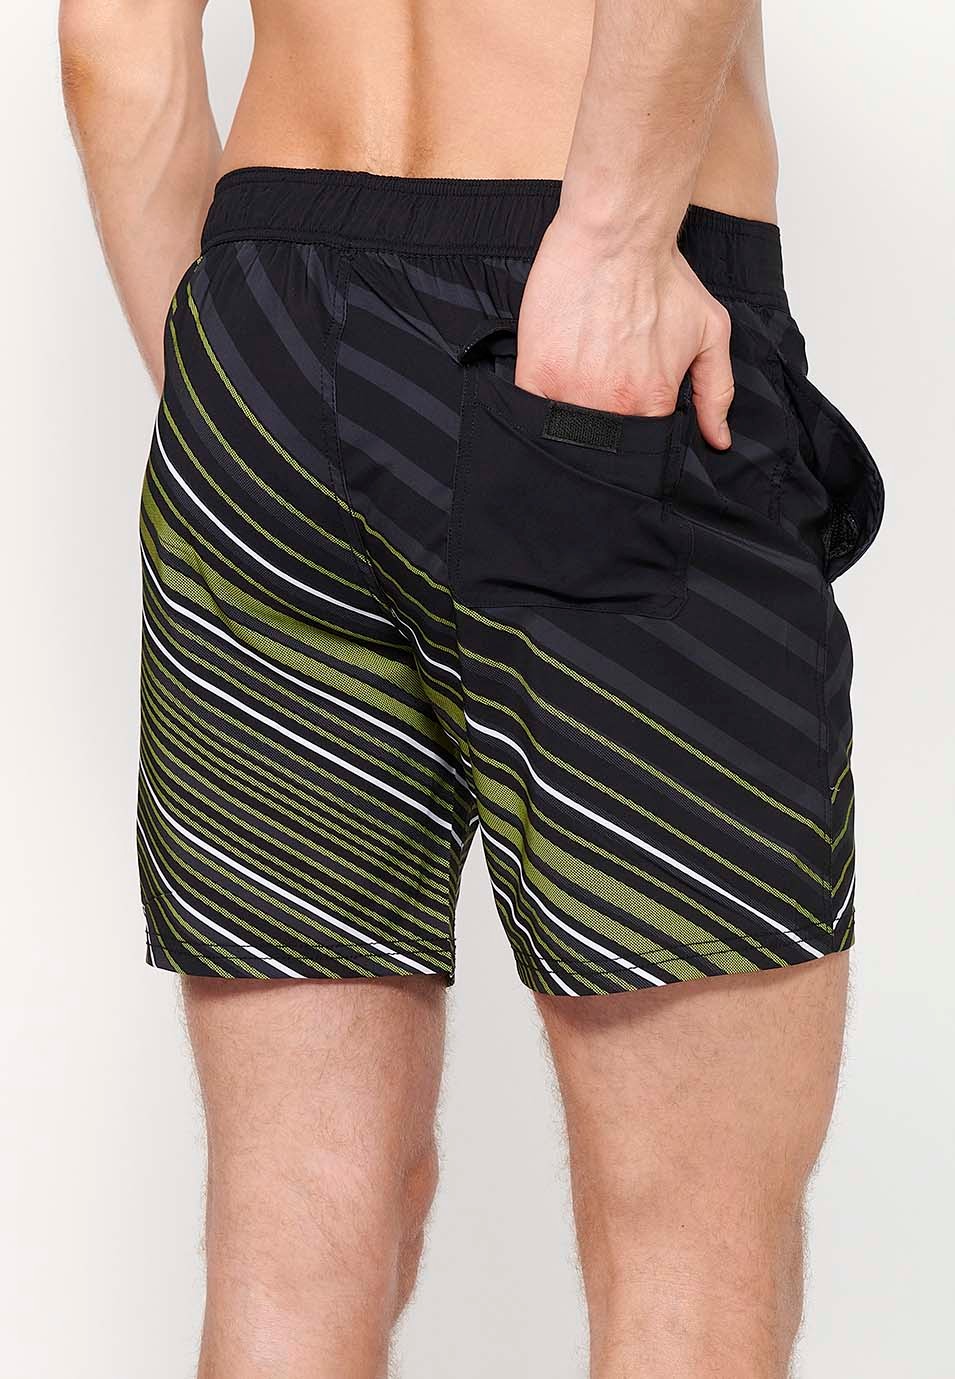 Printed short swimsuit with adjustable waist with drawstring and back pocket and one interior pocket in Lime Color for Men 4